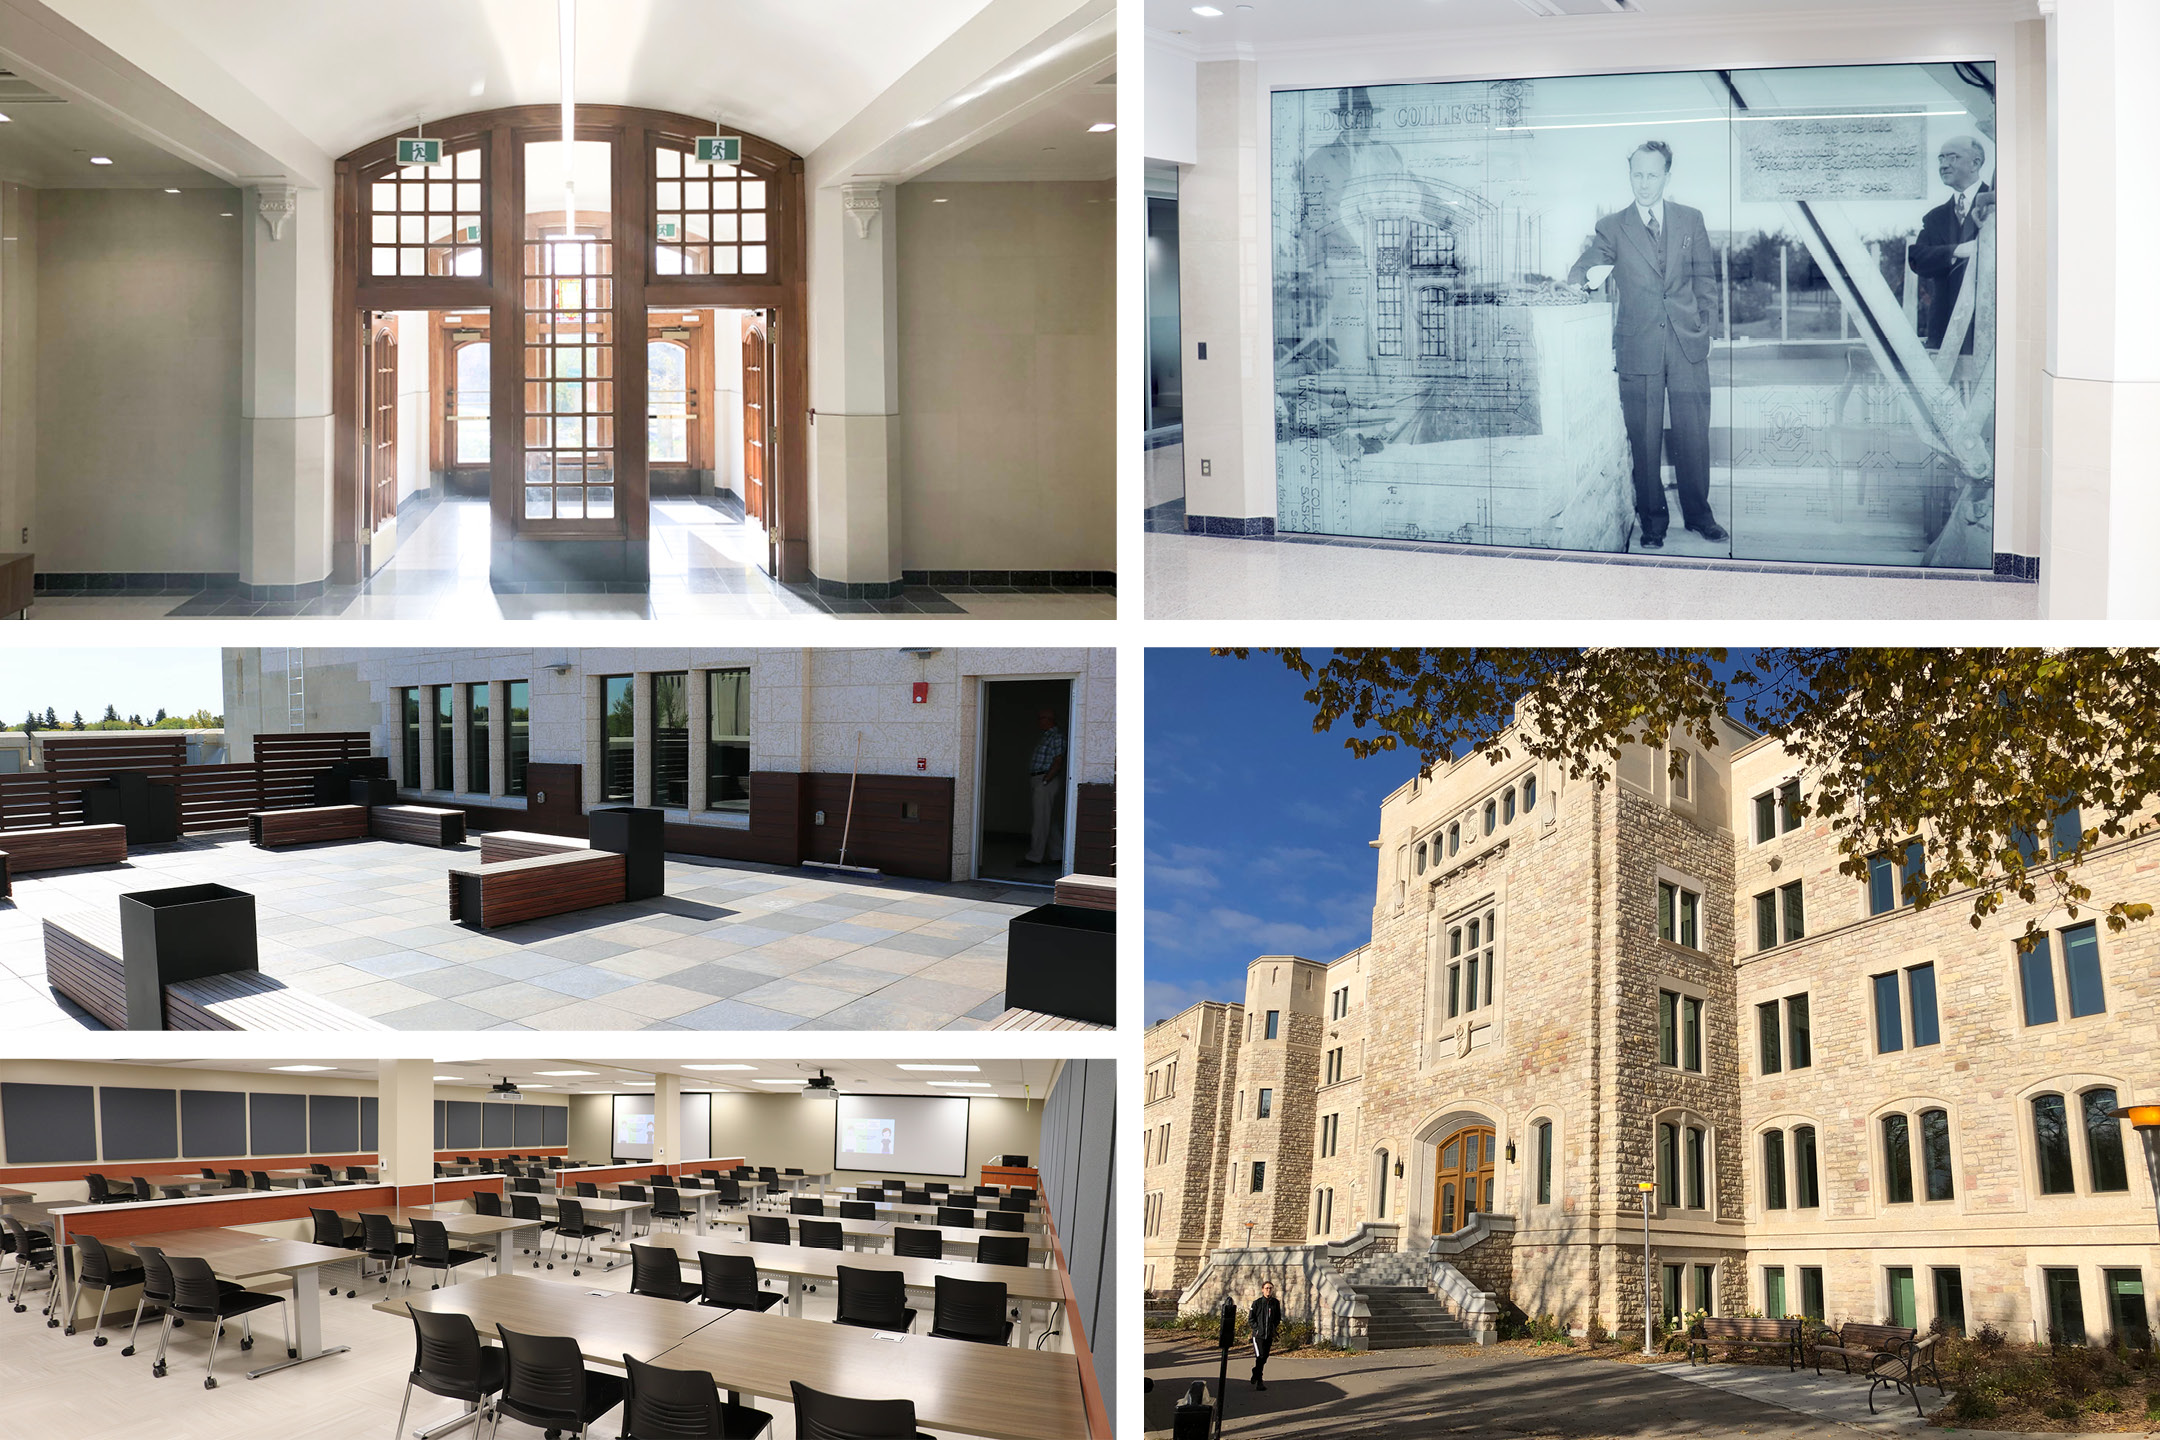 A-Wing renovations included: restoration of the A-Wing Main Entrance to its original 1948 design with the high-coved ceiling (top left); a glass panel display of Saskatchewan’s seventh premier and the “Father of Medicare,” Tommy Douglas (top right); a 4th-floor faculty and staff rooftop patio (middle left); 1A60, the largest renovated classroom in the A-Wing with a seating capacity of 84 (bottom left); and repaired front entrance steps (bottom right).